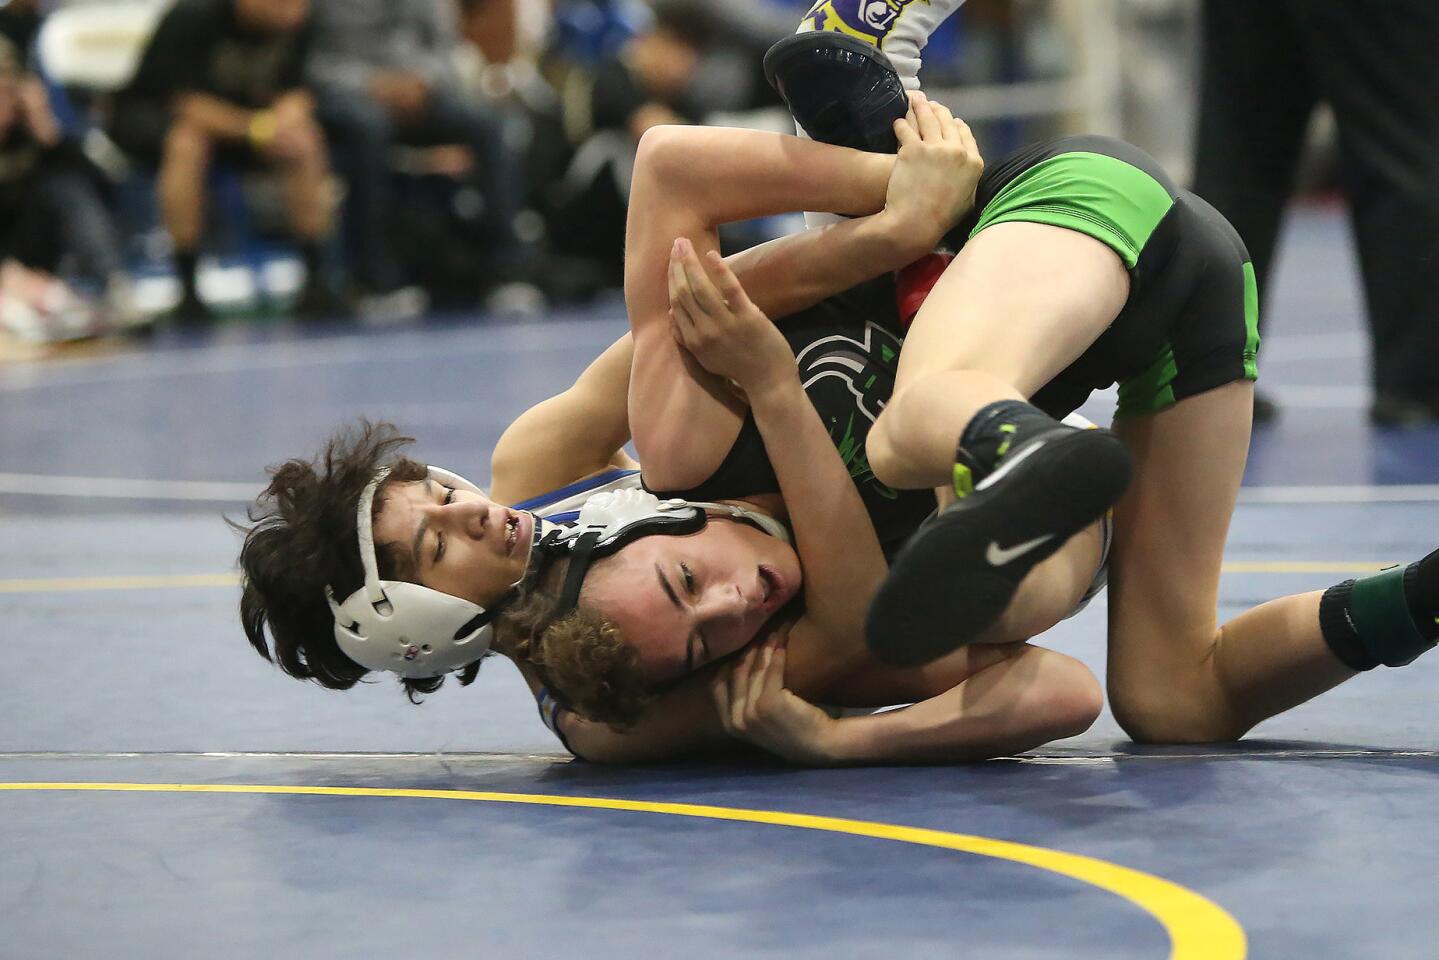 Fountain Valley's Sean Solis, left, takes down his opponent in the 106 lb. division of the Five Counties wrestling tournament at Fountain Valley High on Saturday